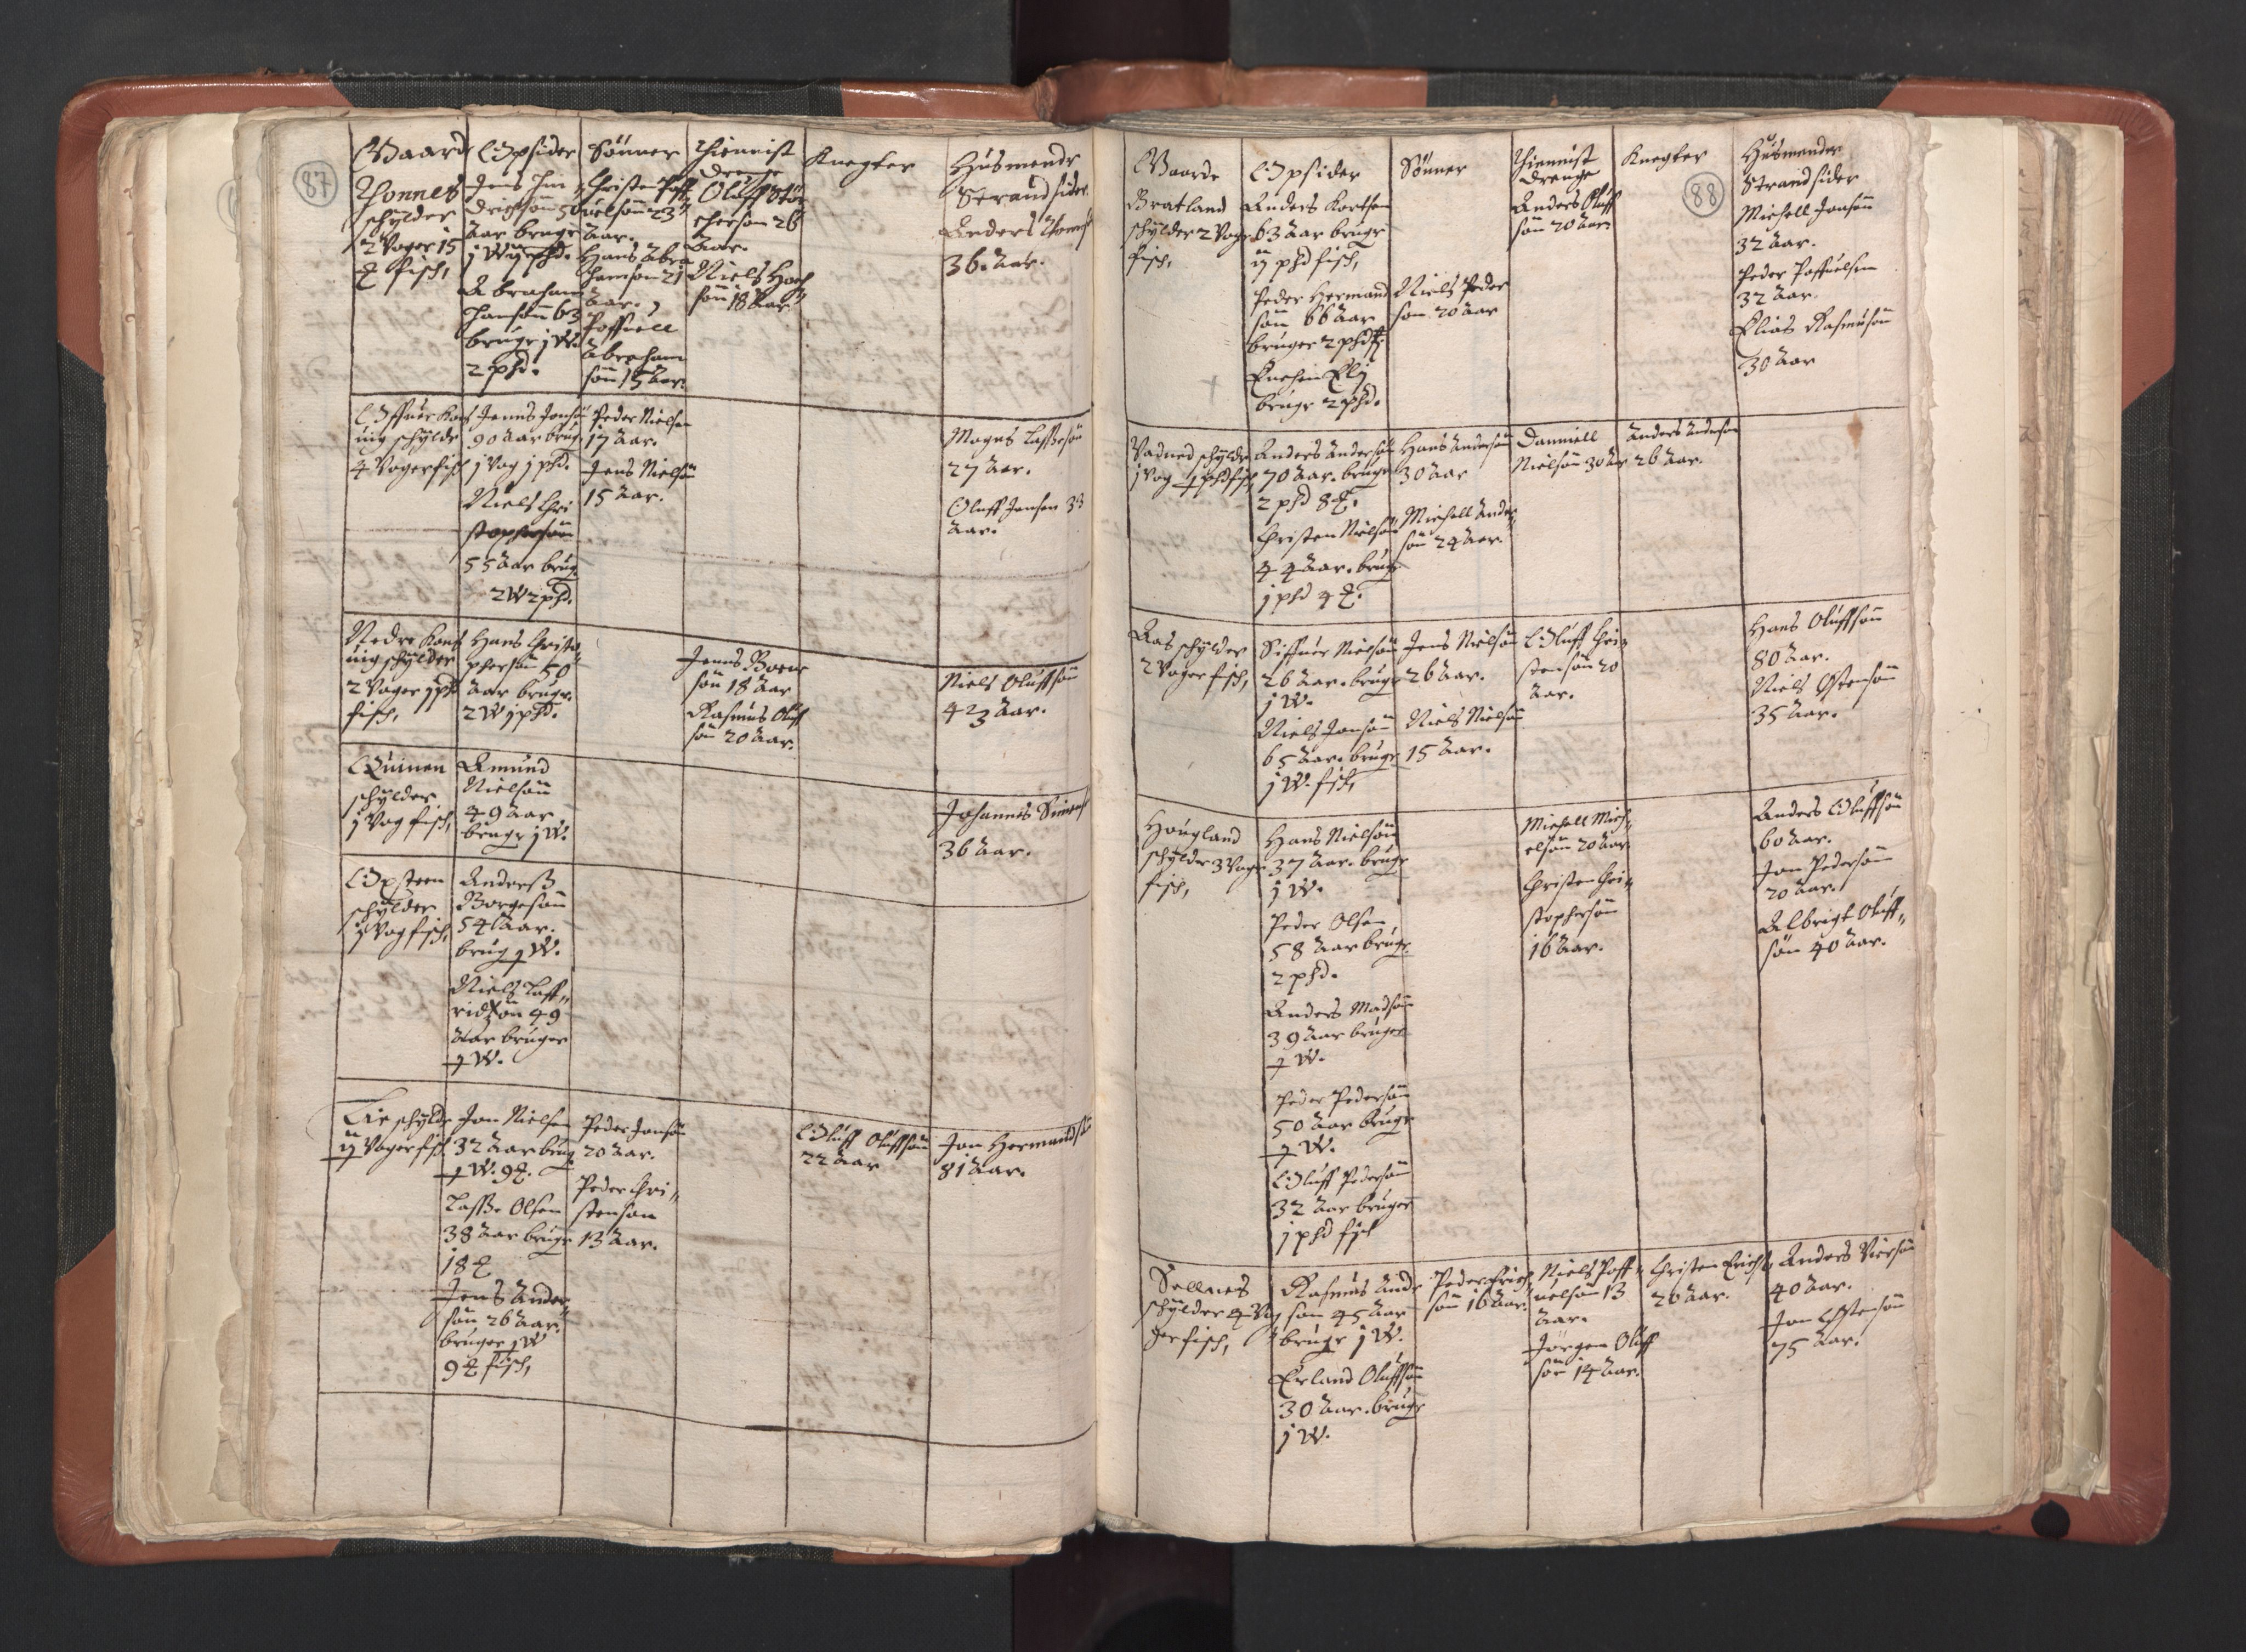 RA, Vicar's Census 1664-1666, no. 35: Helgeland deanery and Salten deanery, 1664-1666, p. 87-88